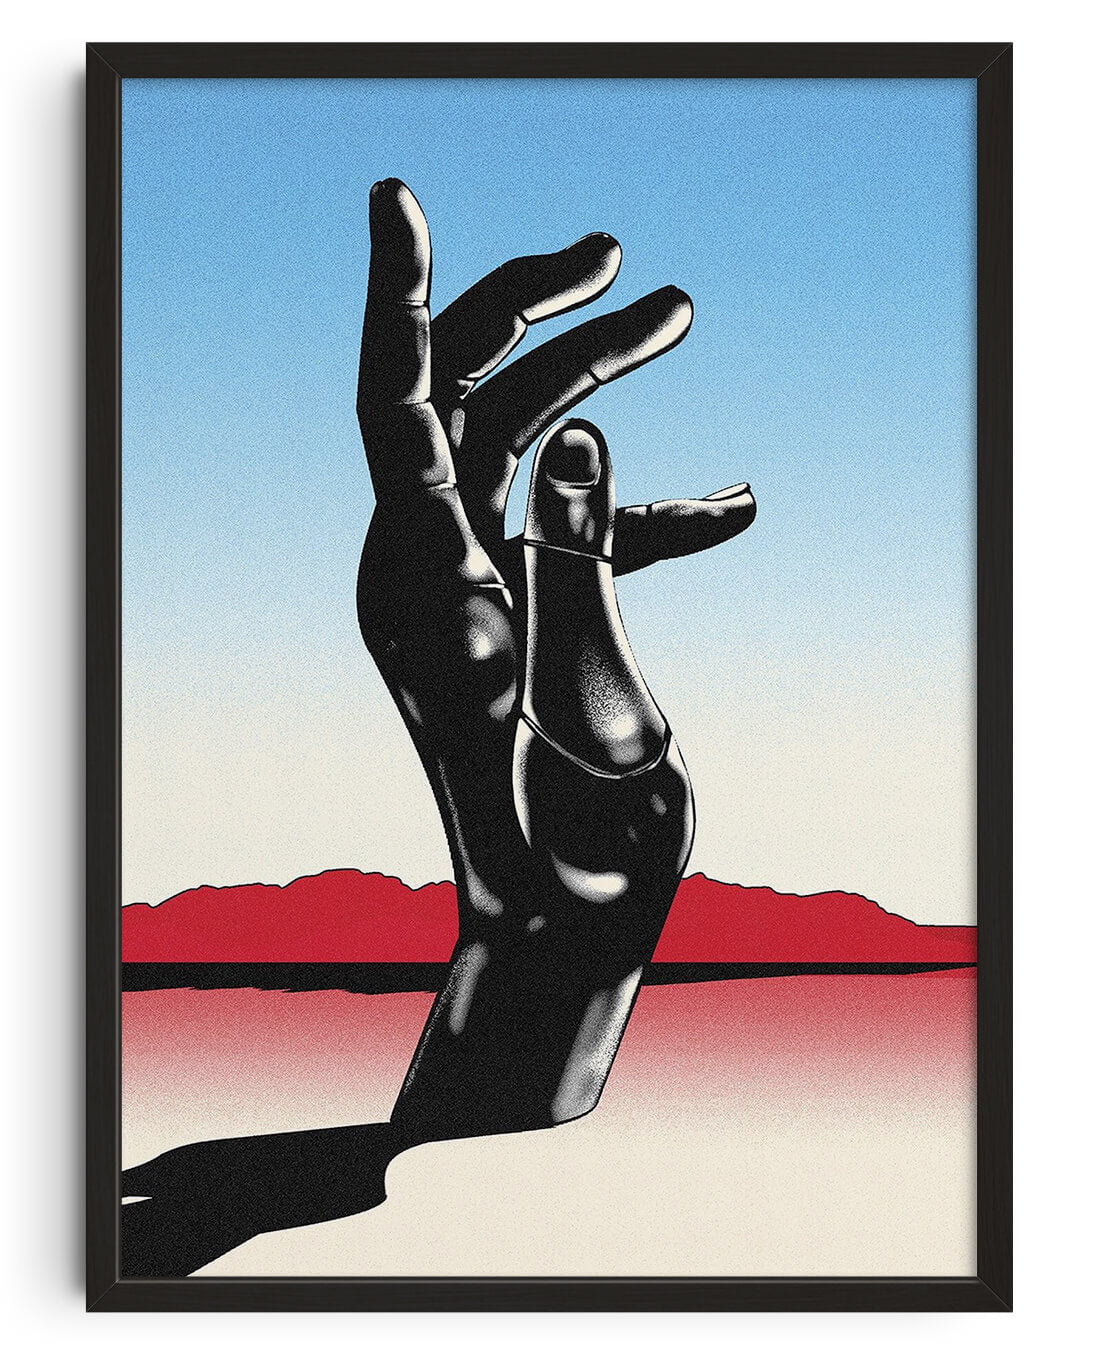 Tatooine Hand Models Wanted by Will Da Costa contemporary wall art print from DROOL